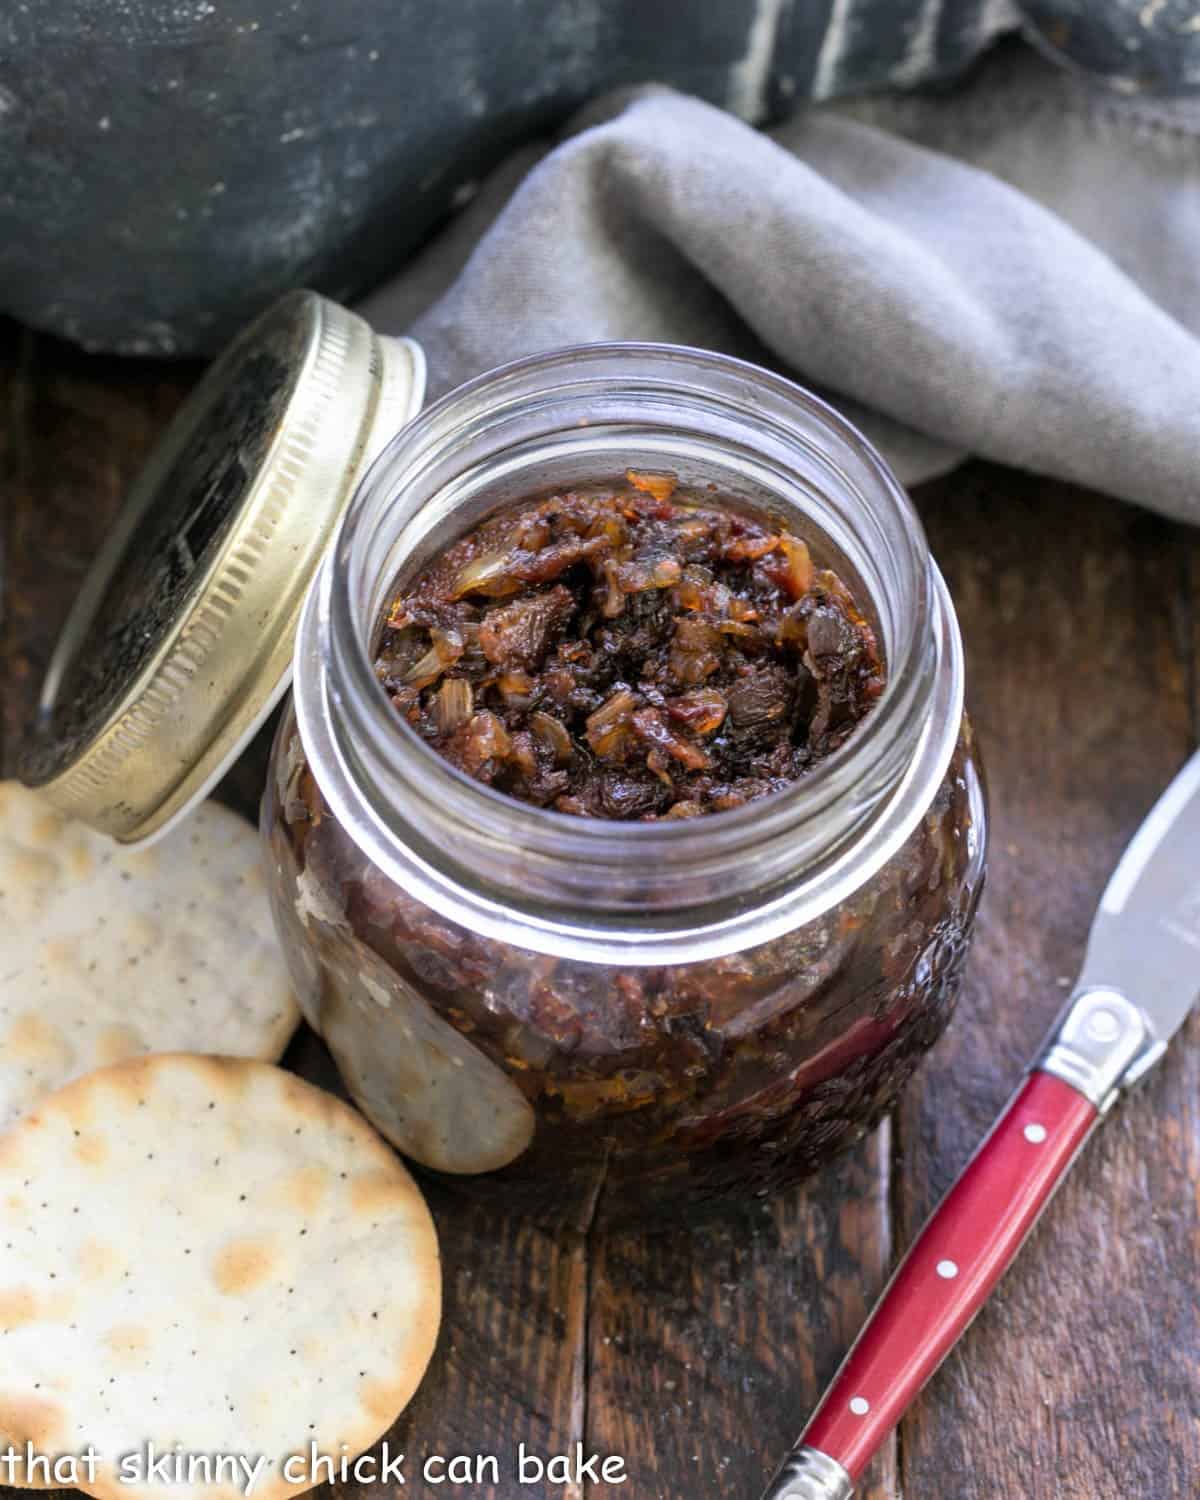 A jar of baon jame with crackers and a red handled knife.